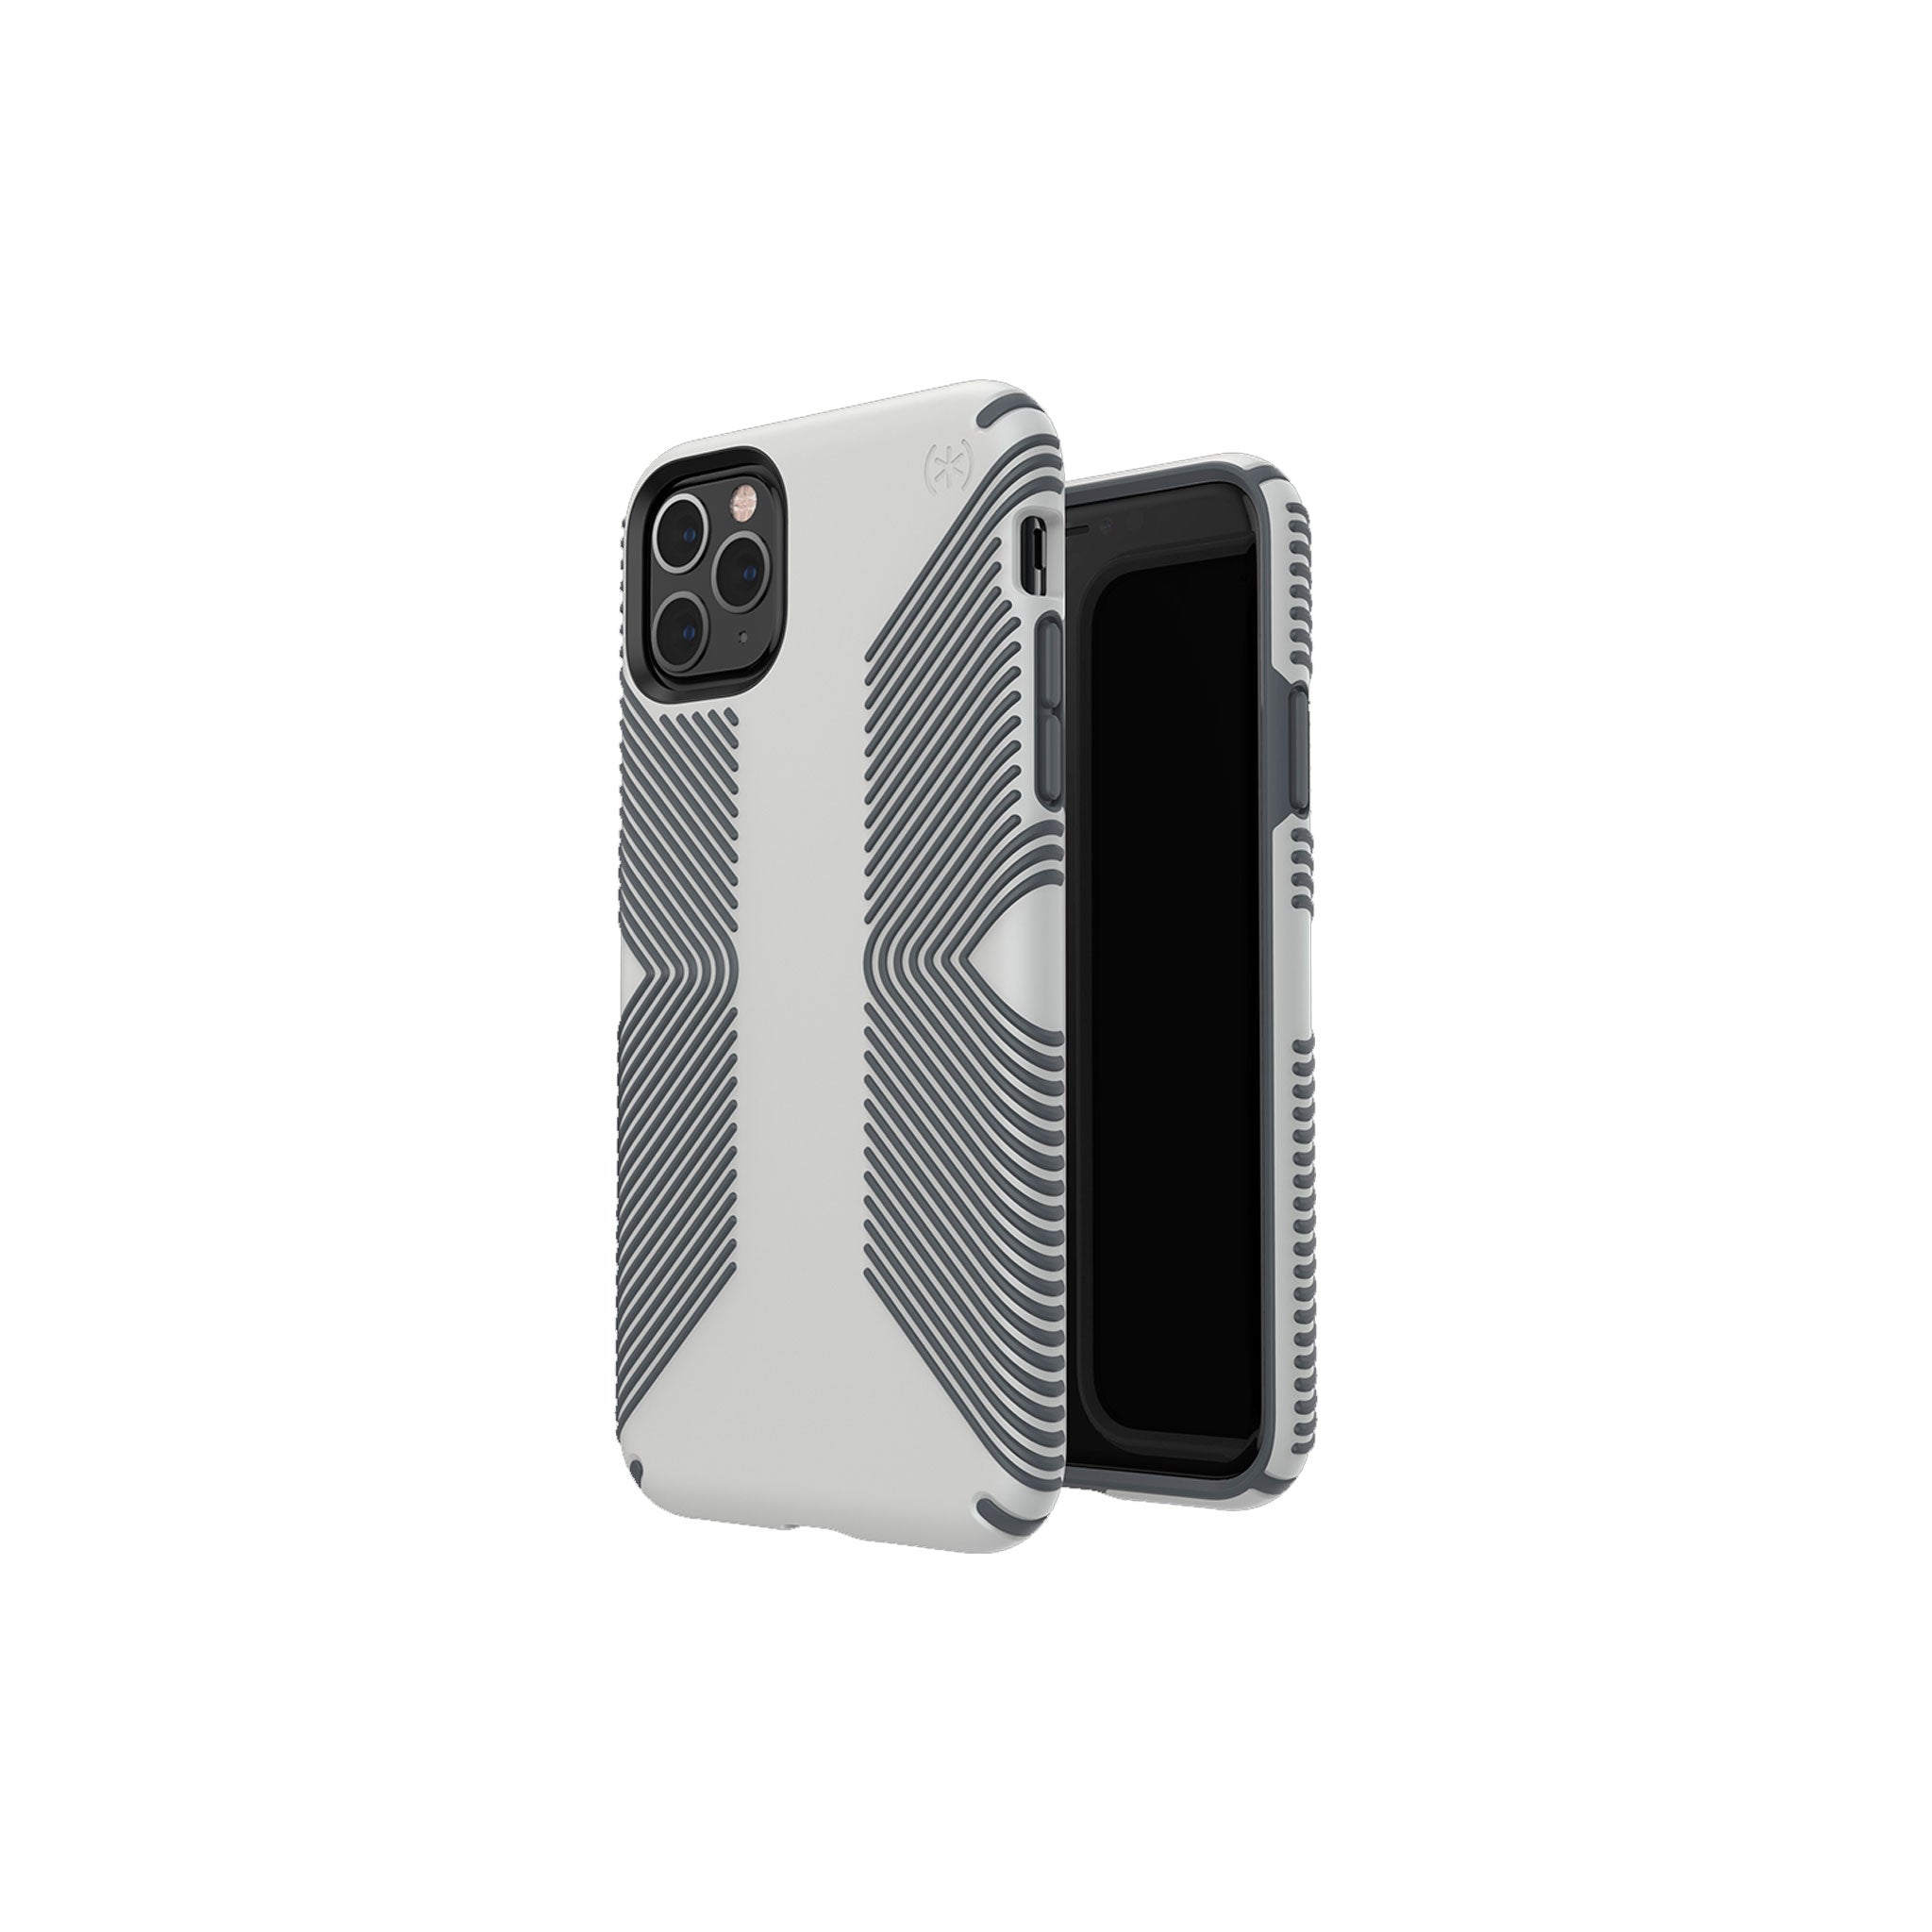 Speck - Presidio Grip Case For Apple Iphone 11 Pro Max - Marble Gray And Anthracite Gray